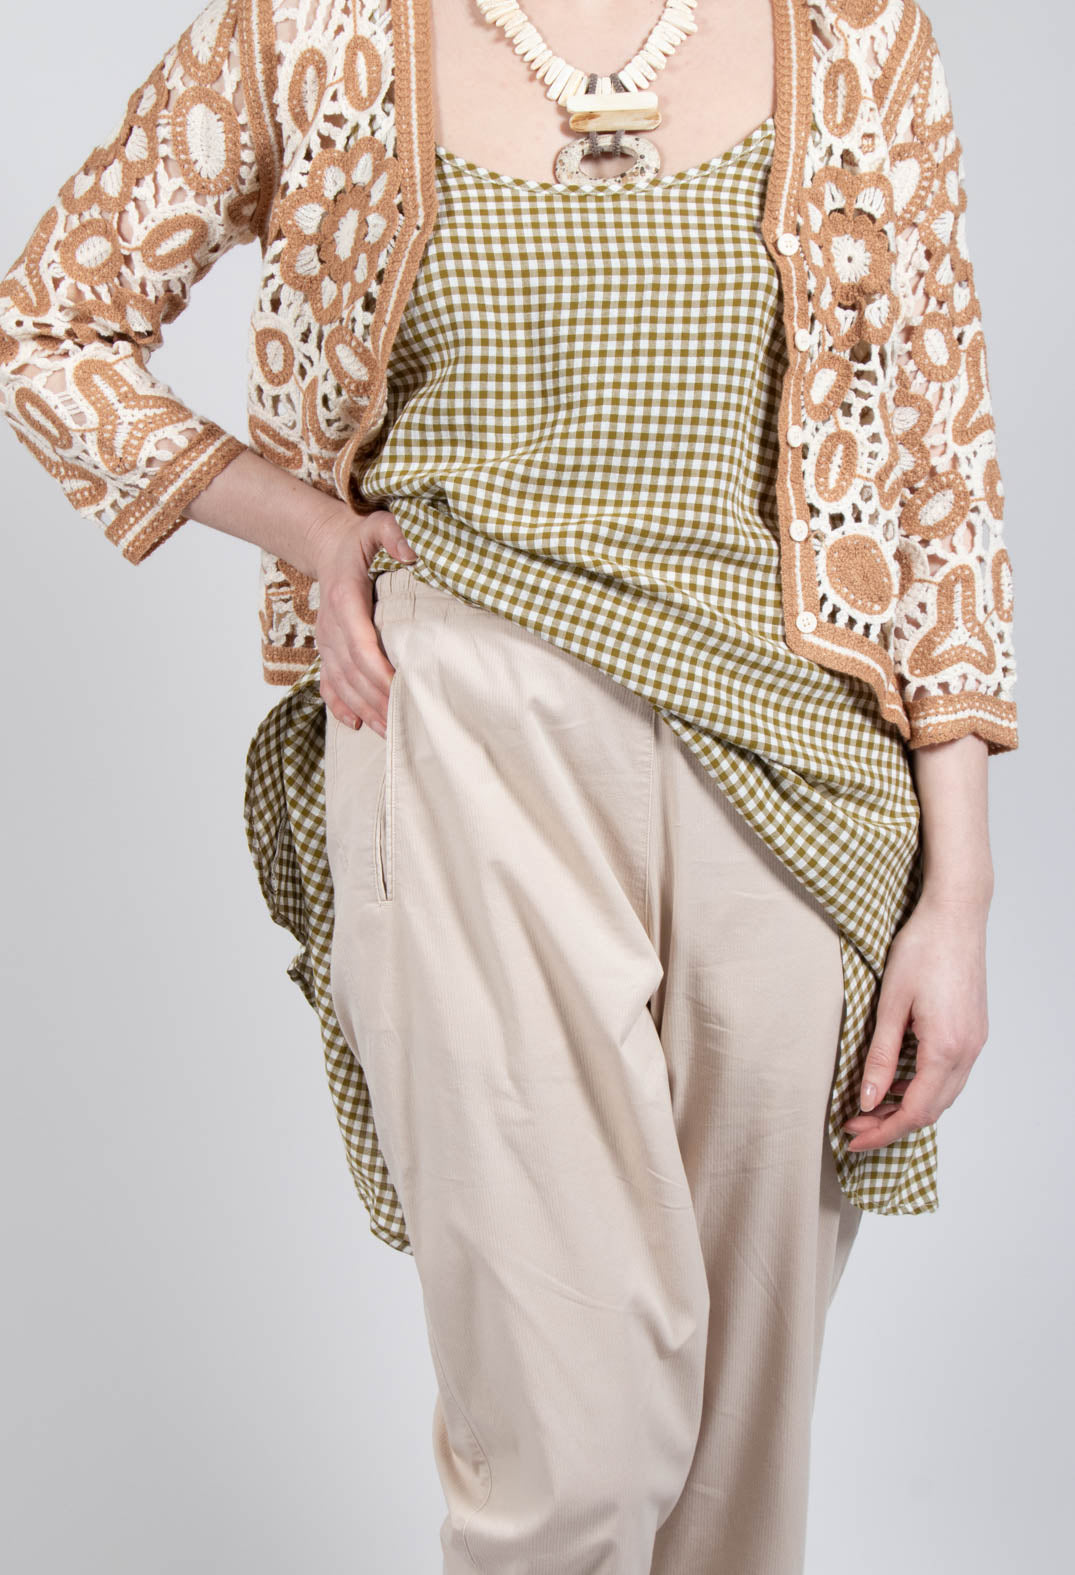 Relaxed Geisha Trousers in Rattan